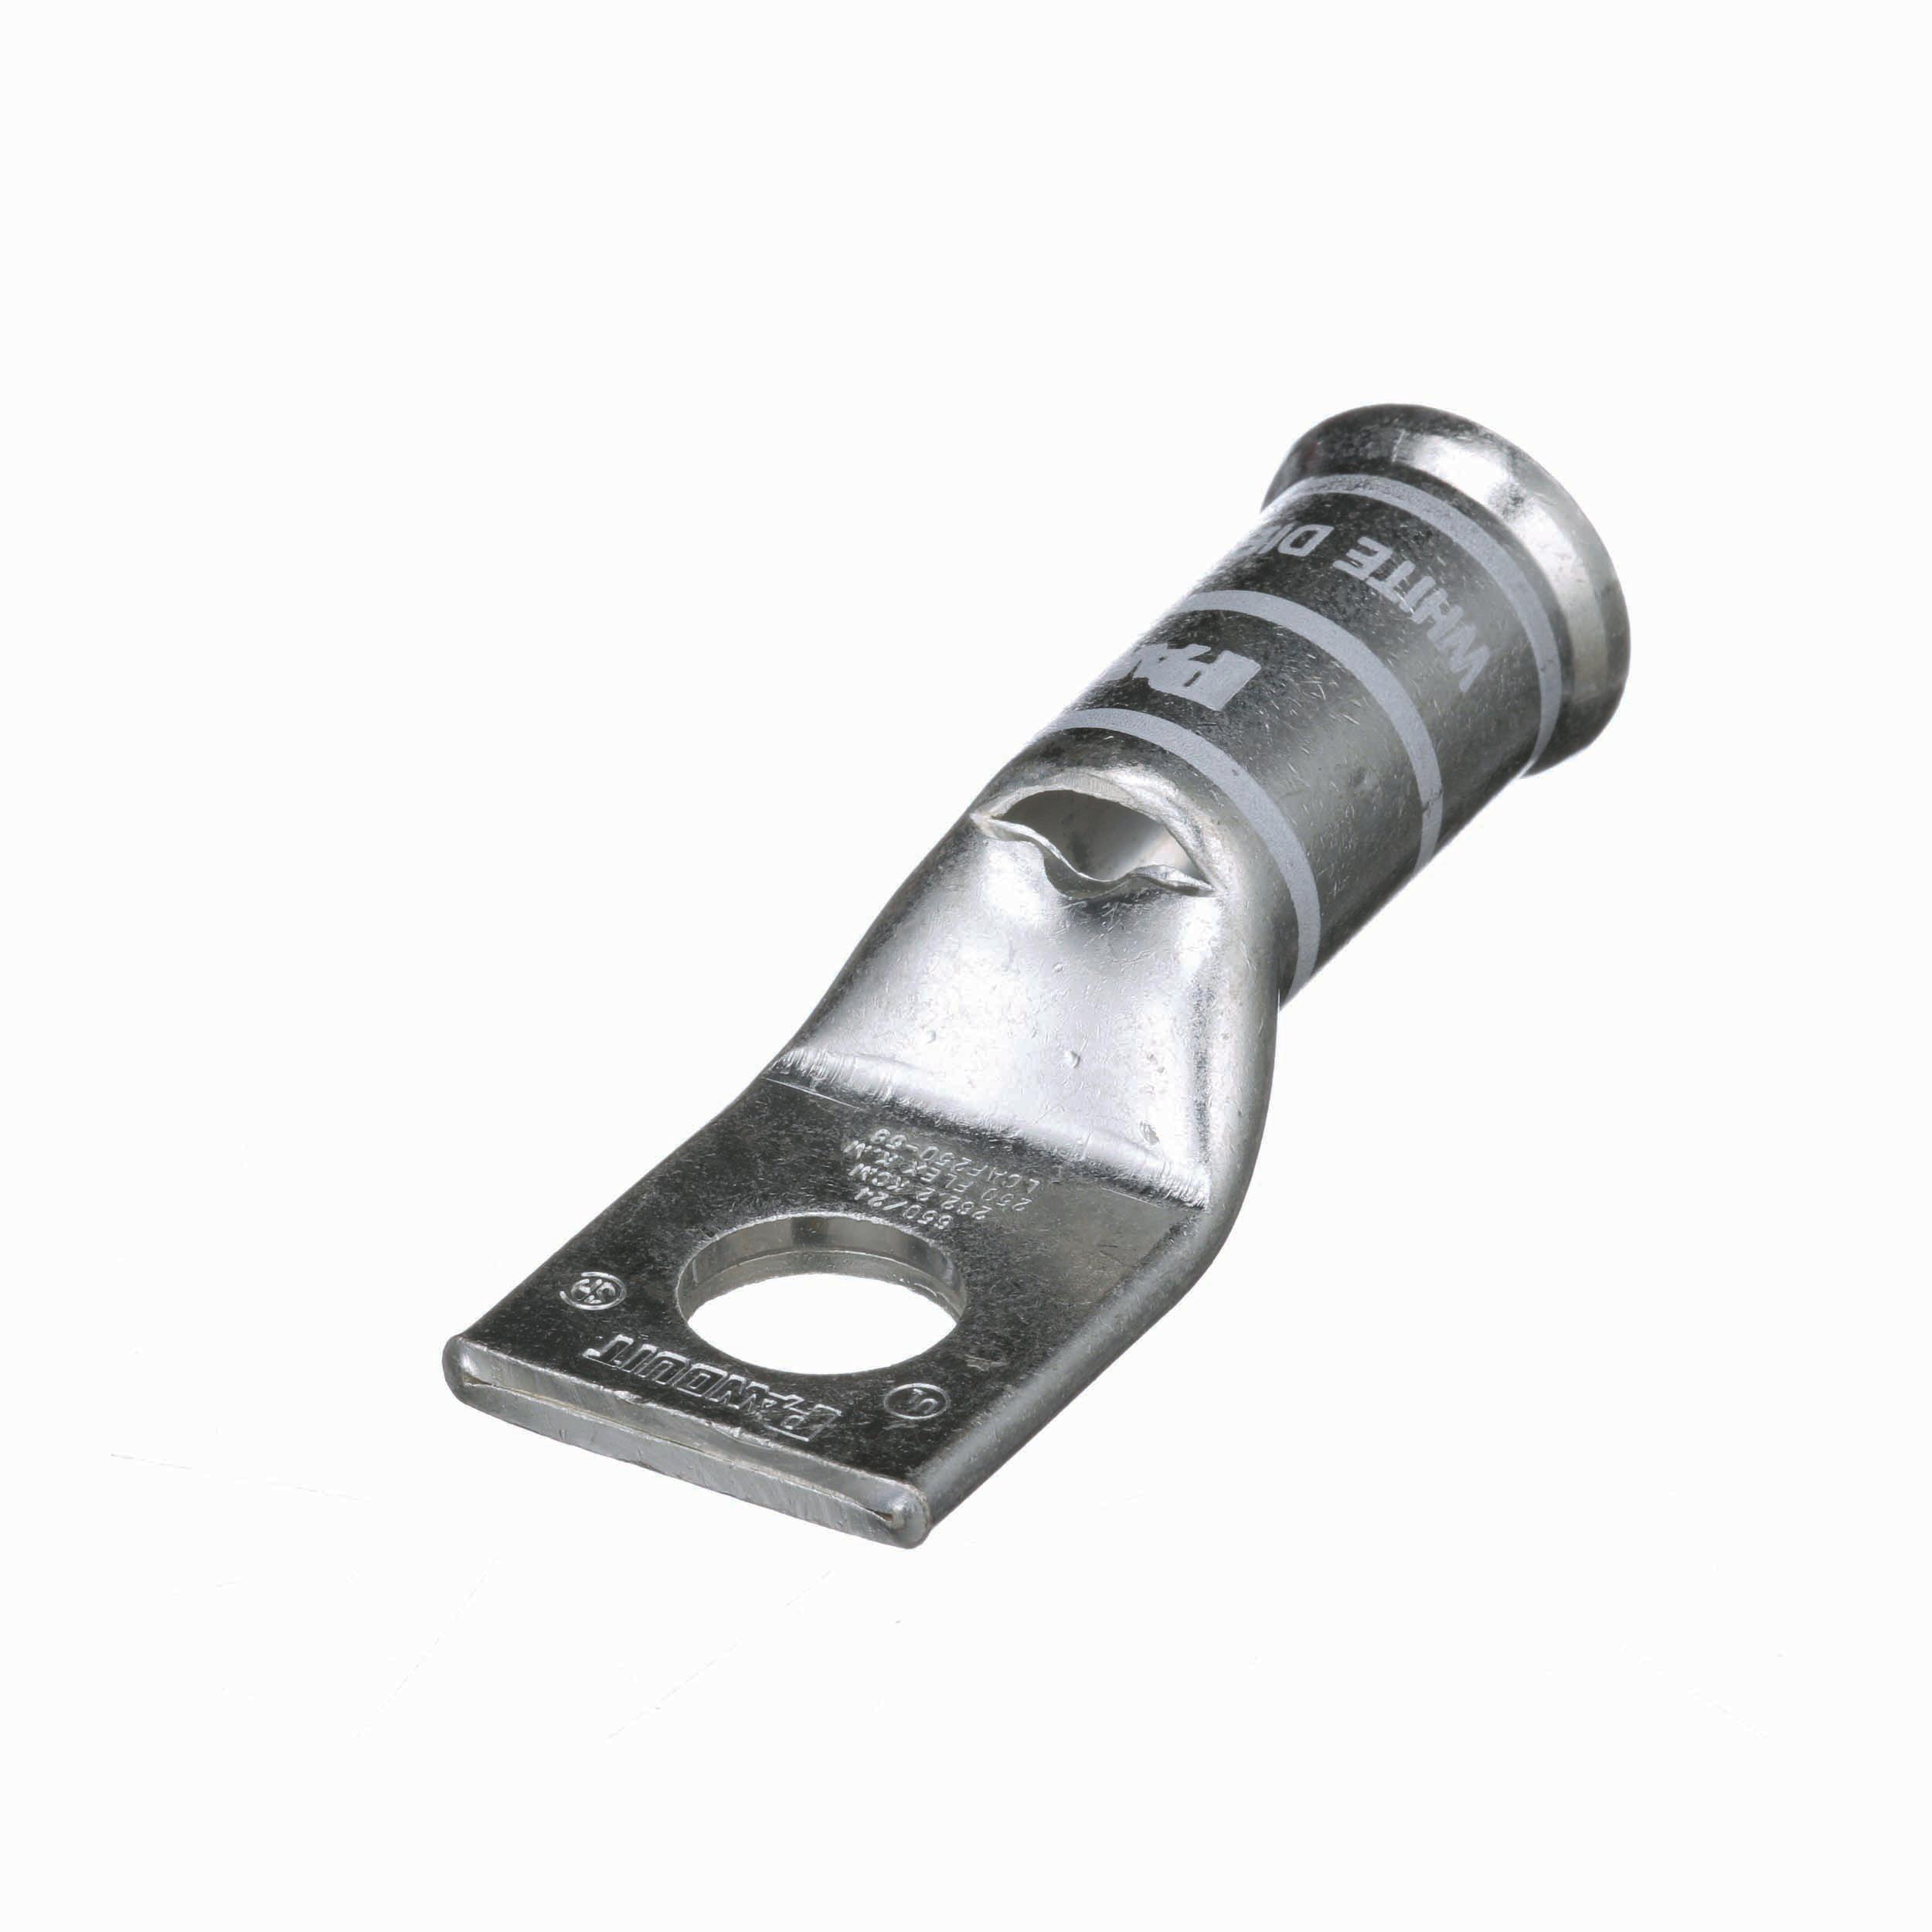 Panduit LCAF250-58-X Pan-Lug Tin-Plated Copper Compression Connectors - Lugs